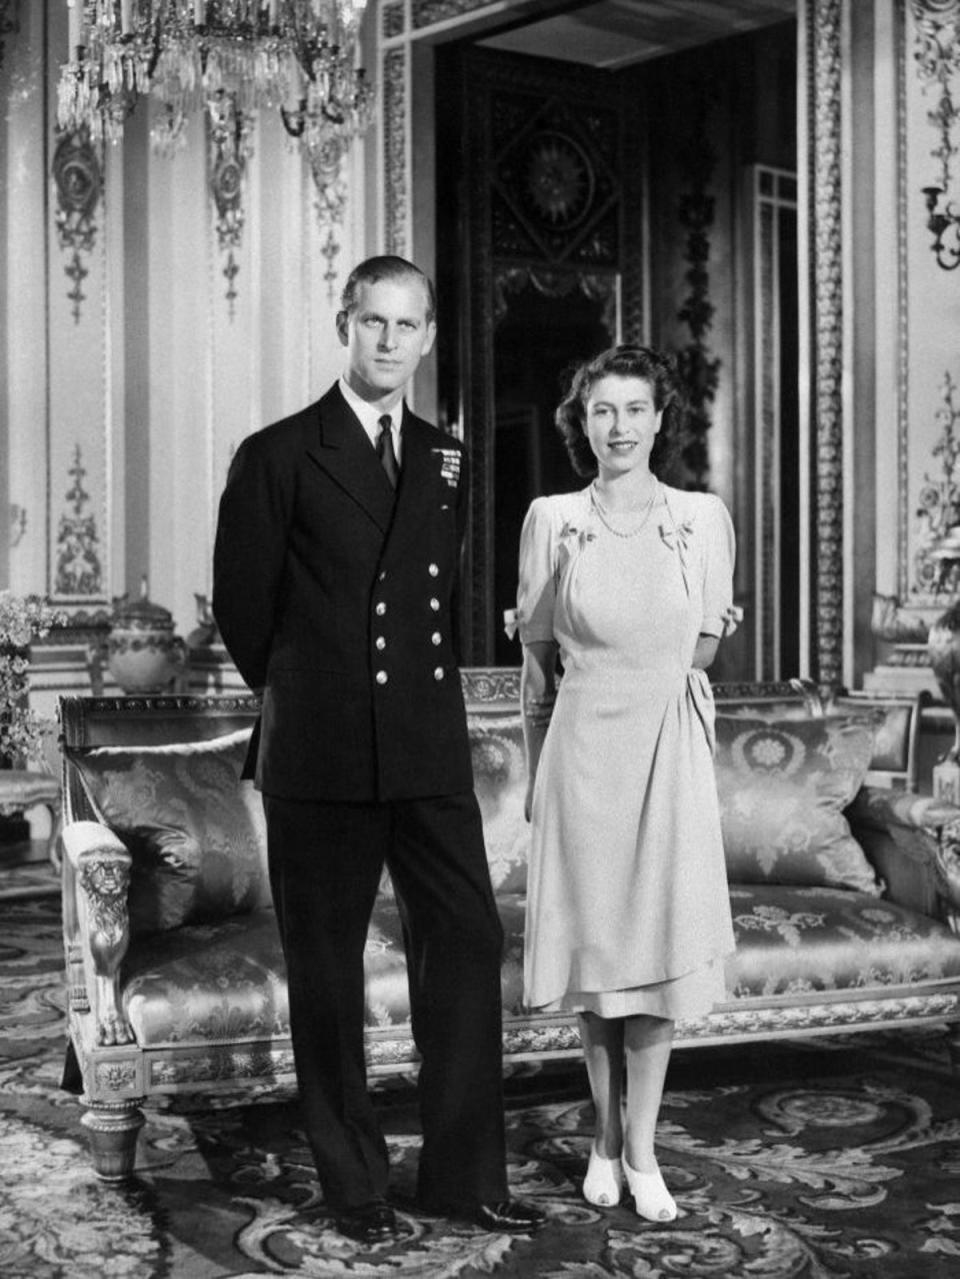 The official announcement of Princess Elizabeth and Phillip Mountbatten's engagement in 1947. The pairing was incredibly controversial as Prince Phillip had no financial standing and he was foreign born, the Prince of Denmark and Greece (though he served Britain in the war and was given British Citizenship) (Getty)